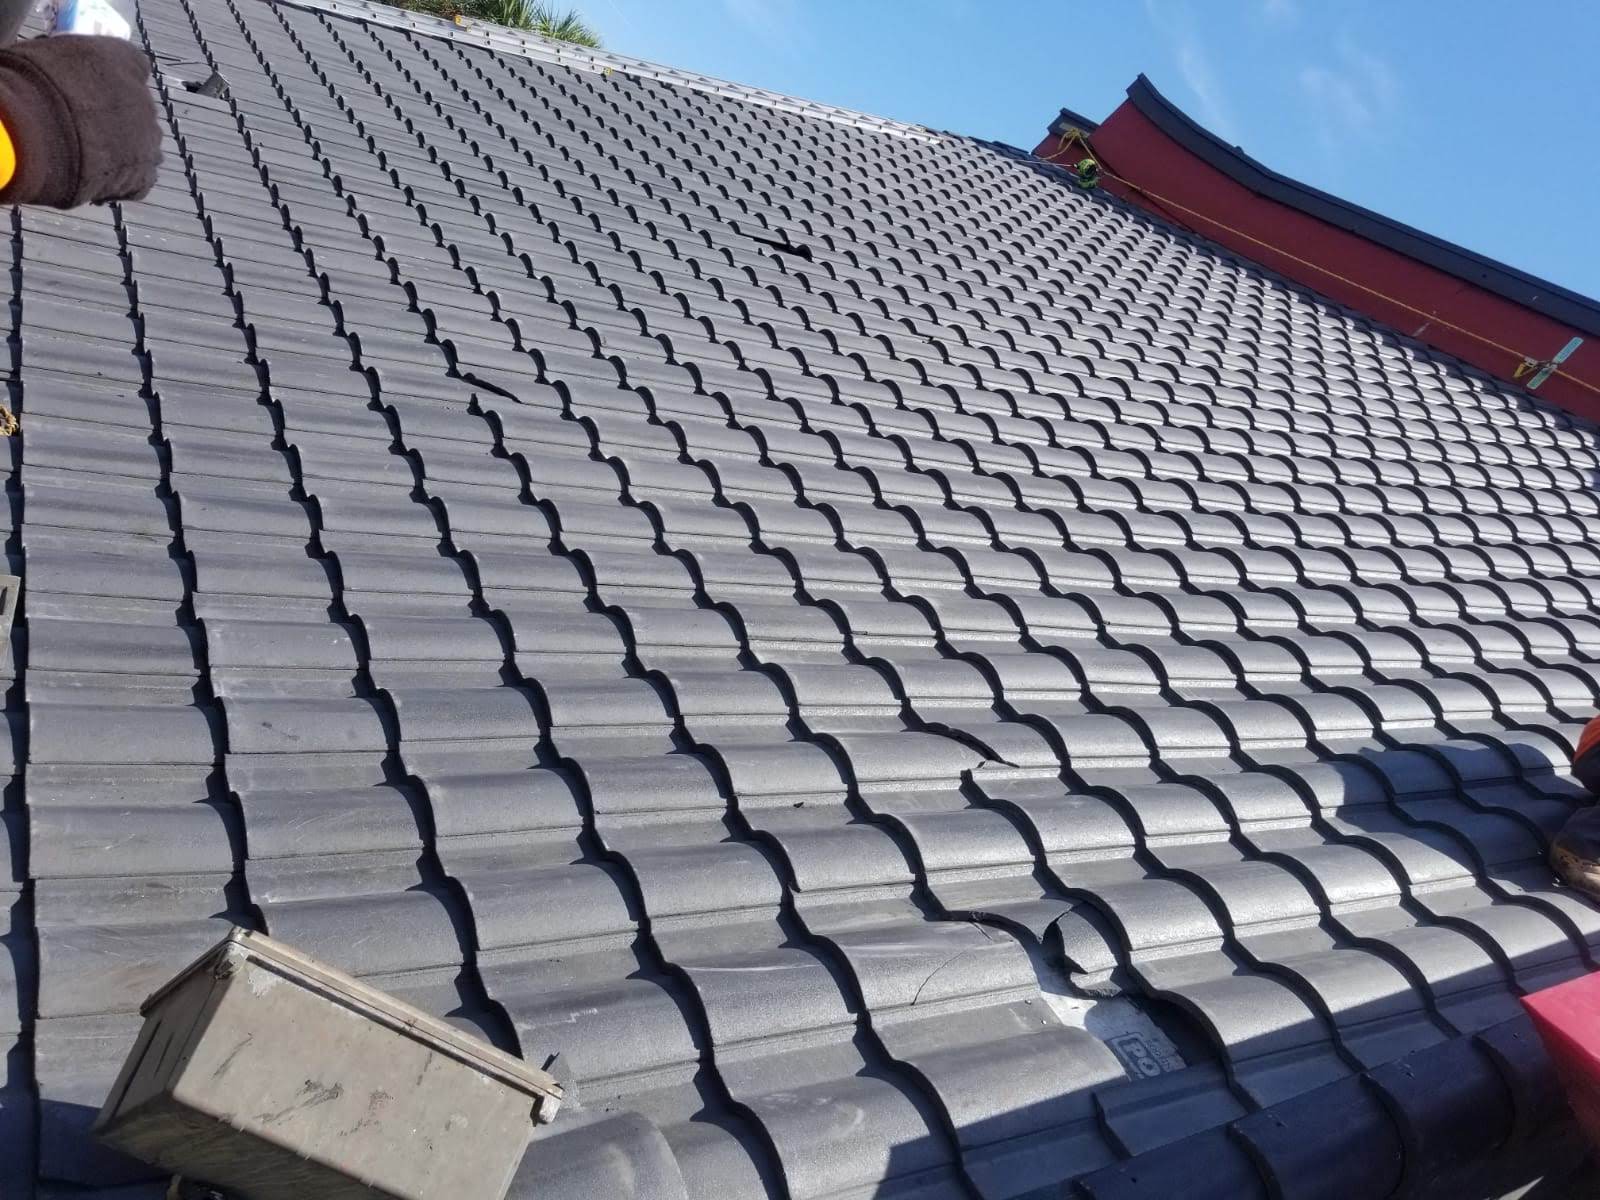 Is There a Difference between Residential and Commercial Roofing?